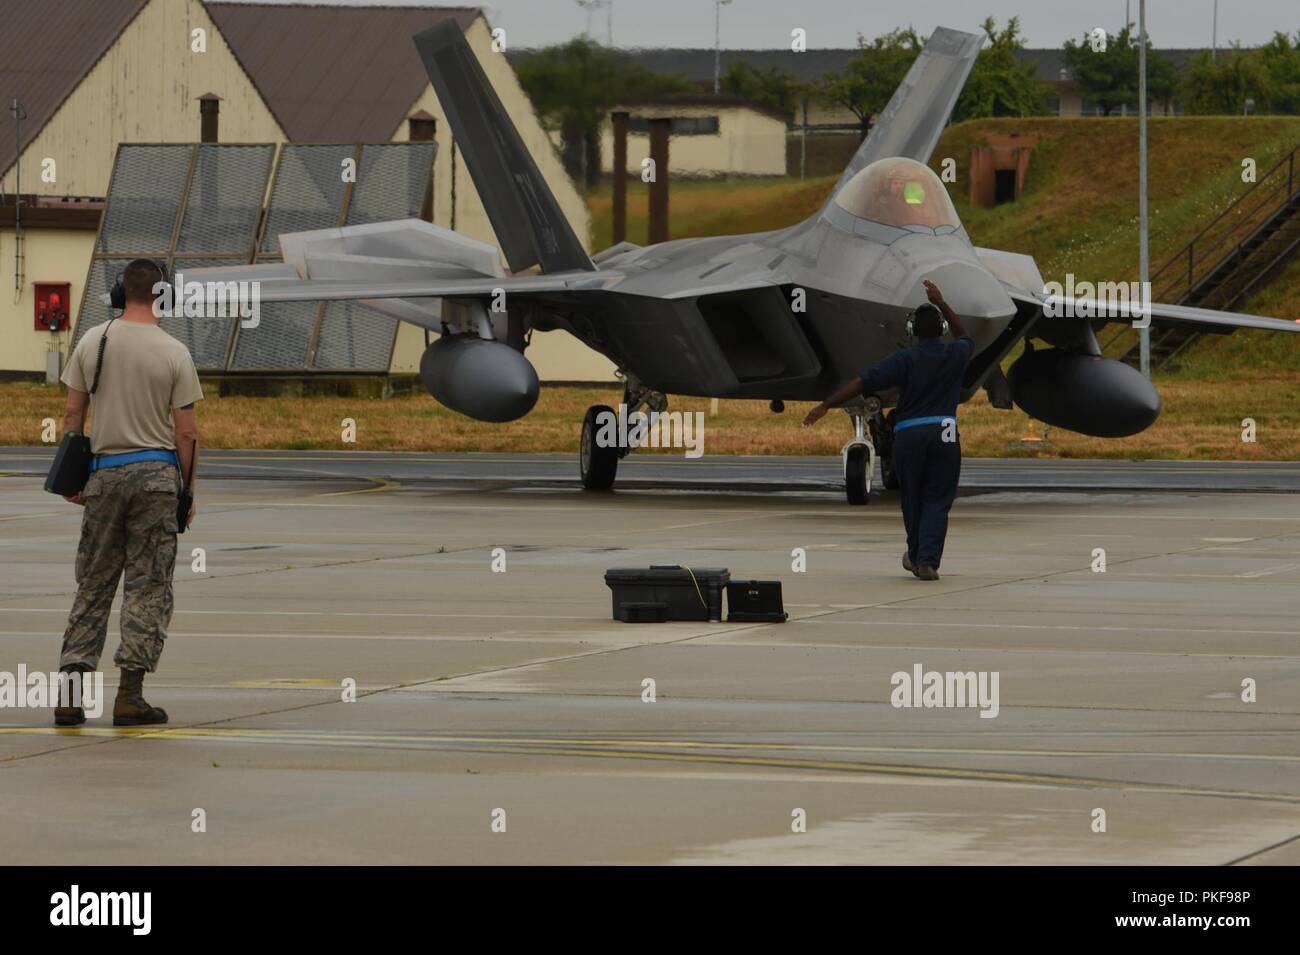 U.S. Air Force F-22 Raptors from the 95th Fighter Squadron, 325th Fighter Wing at Tyndall Air Base, Fla., arrive at Spangdahlem Air Base, Germany, Aug. 8, 2018. The 95th FS is deployed to Europe for several weeks to conduct training with other European-based aircraft as part of a Flying Training Deployment. Forward locations enable collective defense capabilities and provide U.S. and NATO the strategic and operational breadth needed to deter adversaries and assure our allies and partners. Stock Photo